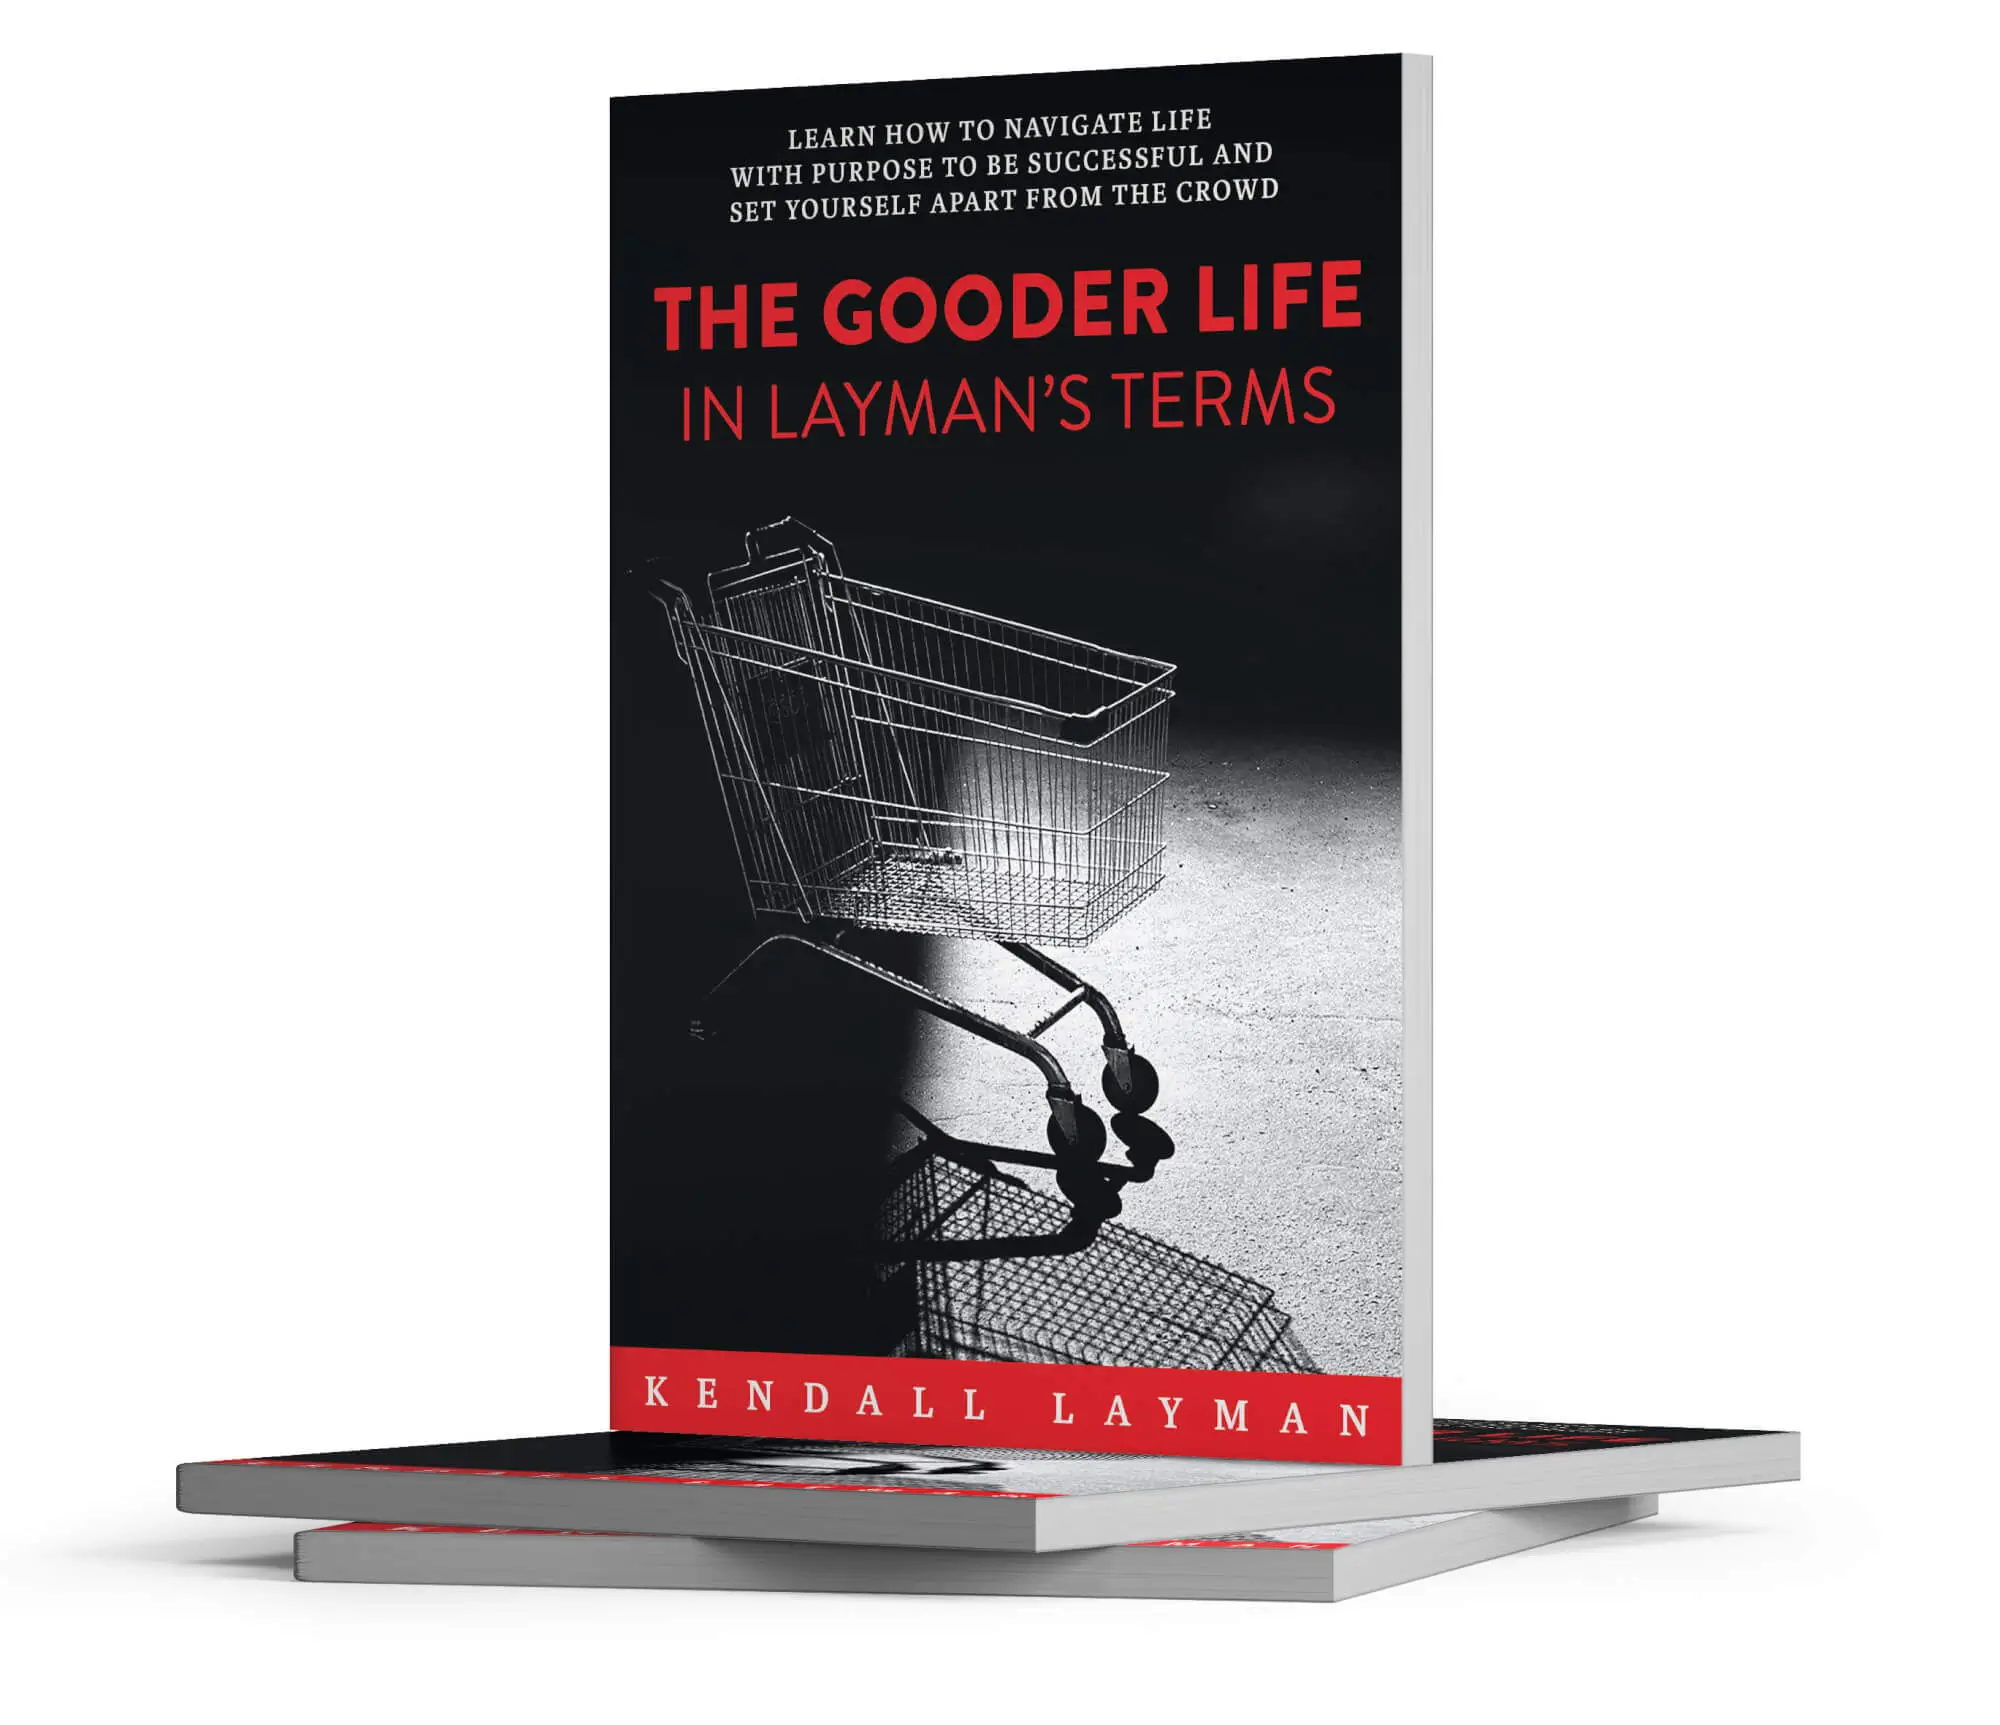 The Gooder Life paperback book sitting on two stacked books